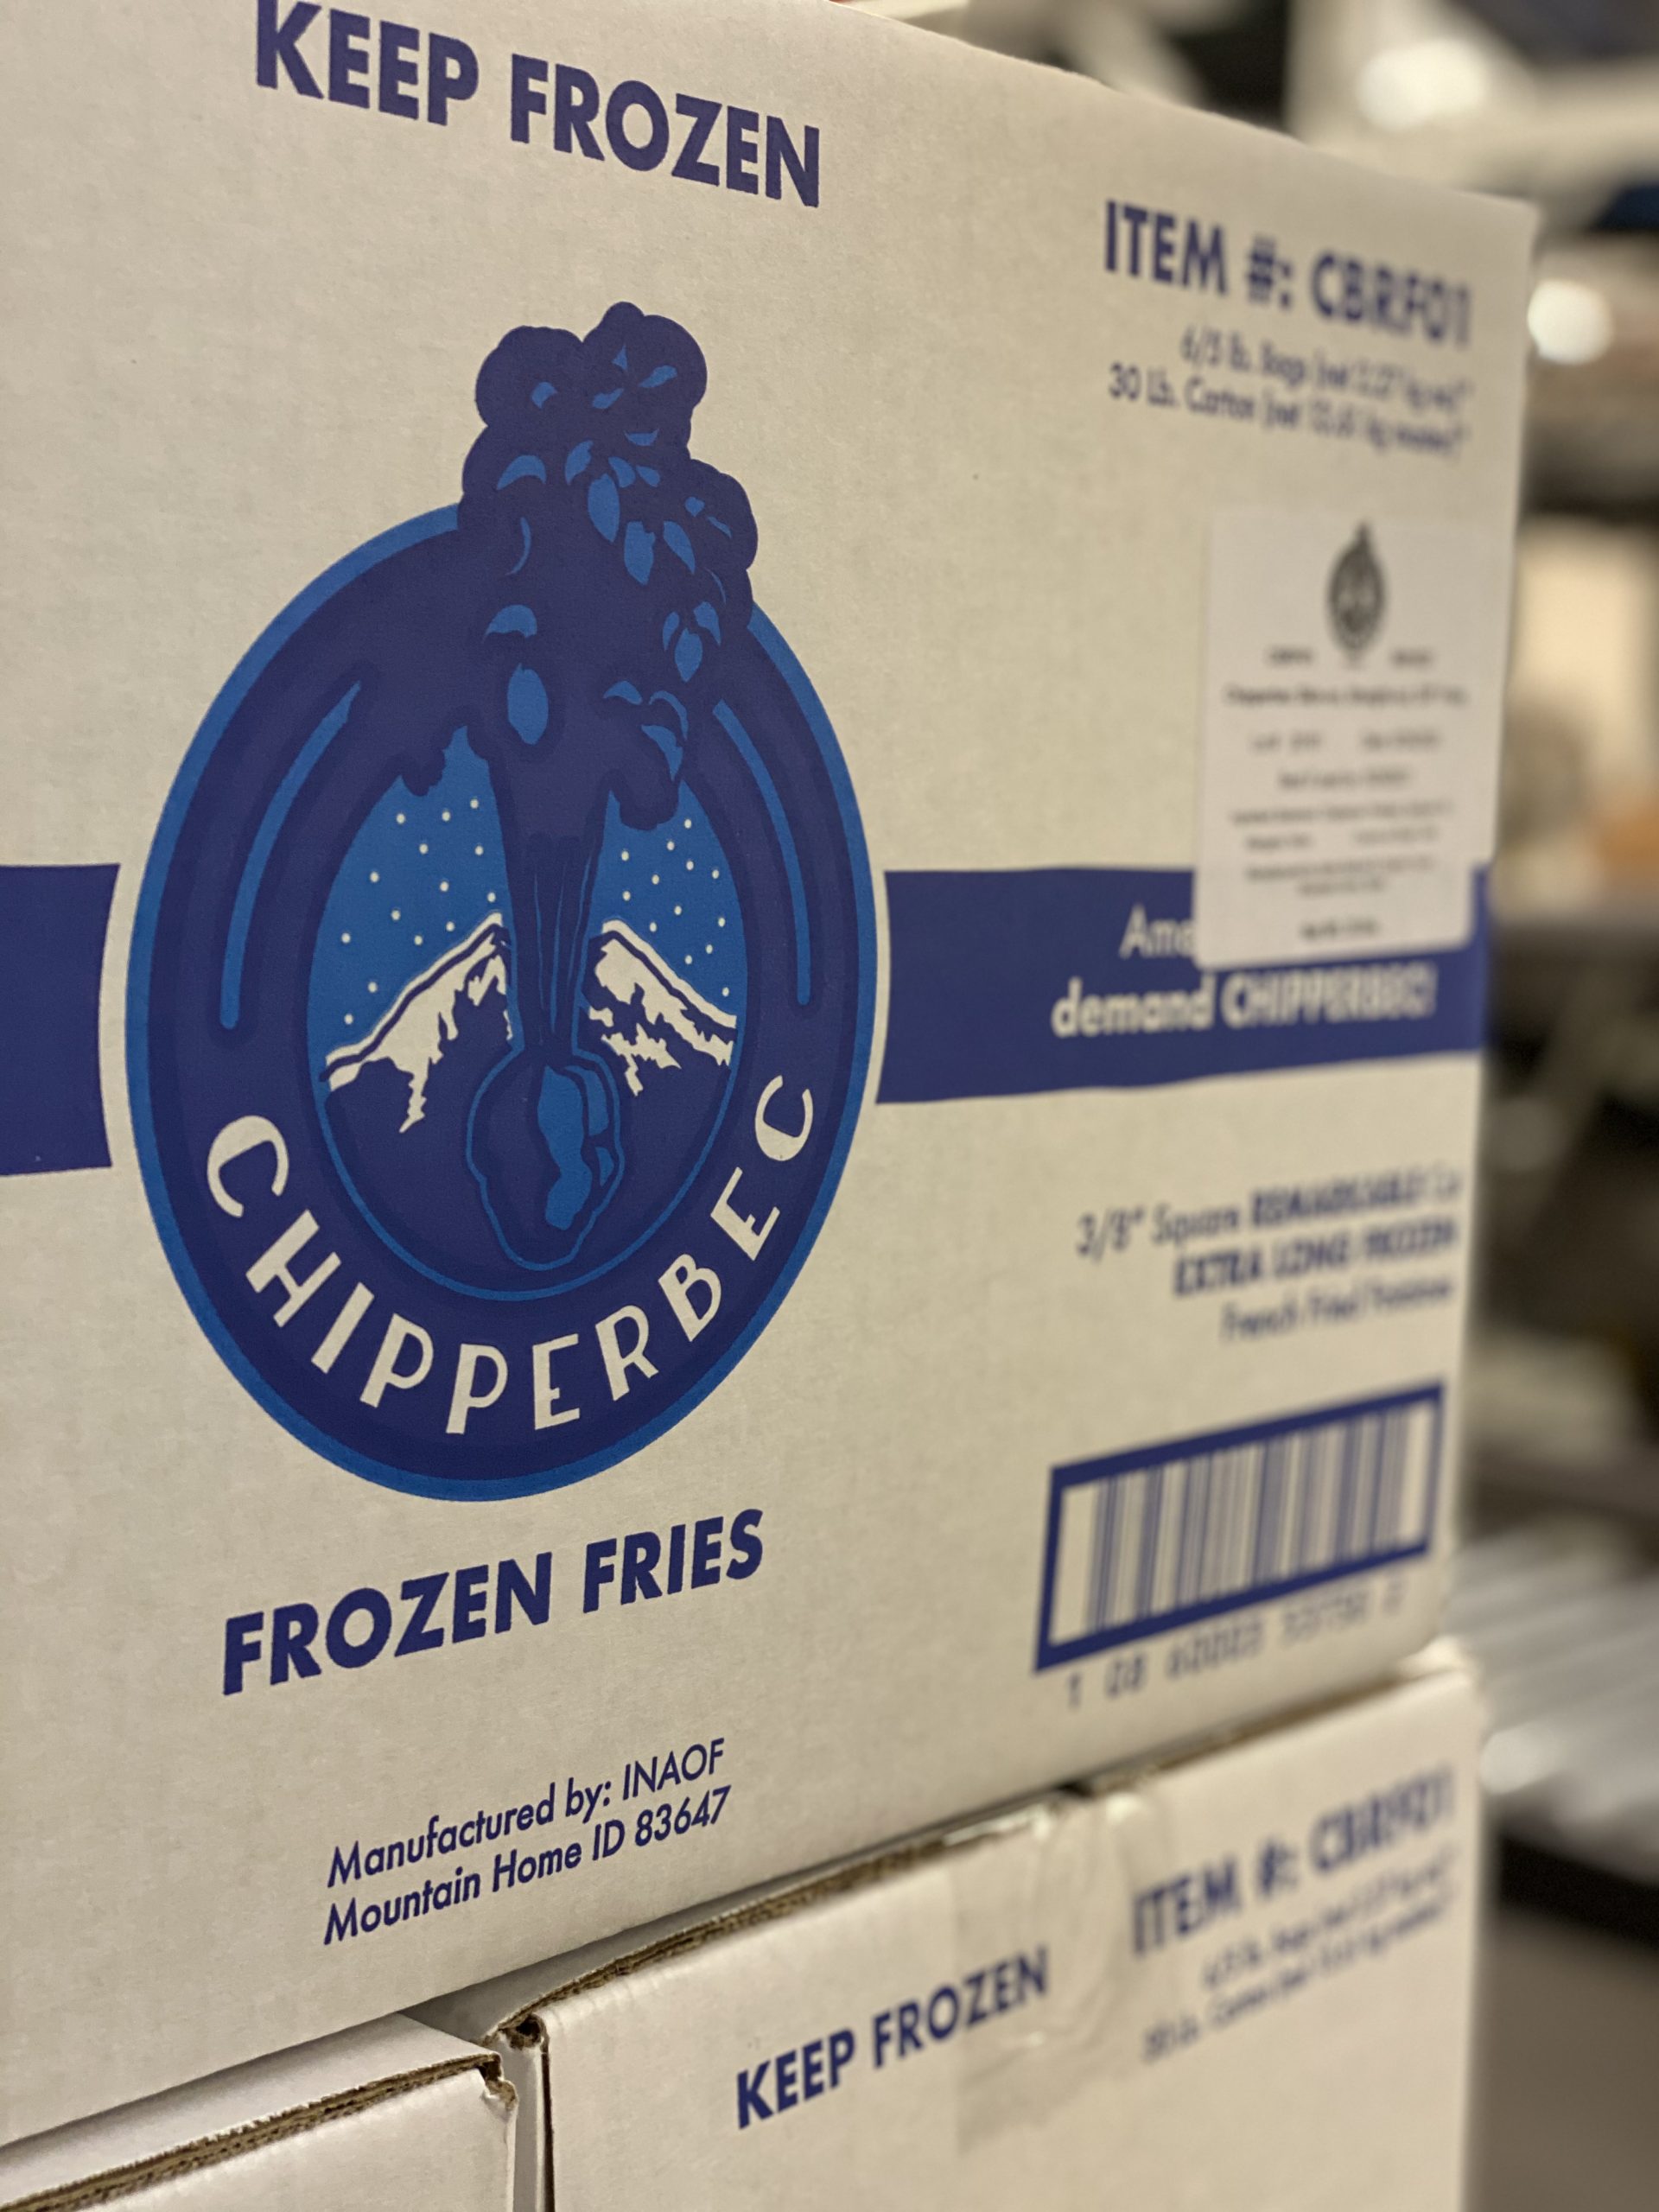 Into the FRY….the new CHIPPERBEC Craft Frozen French Fries!